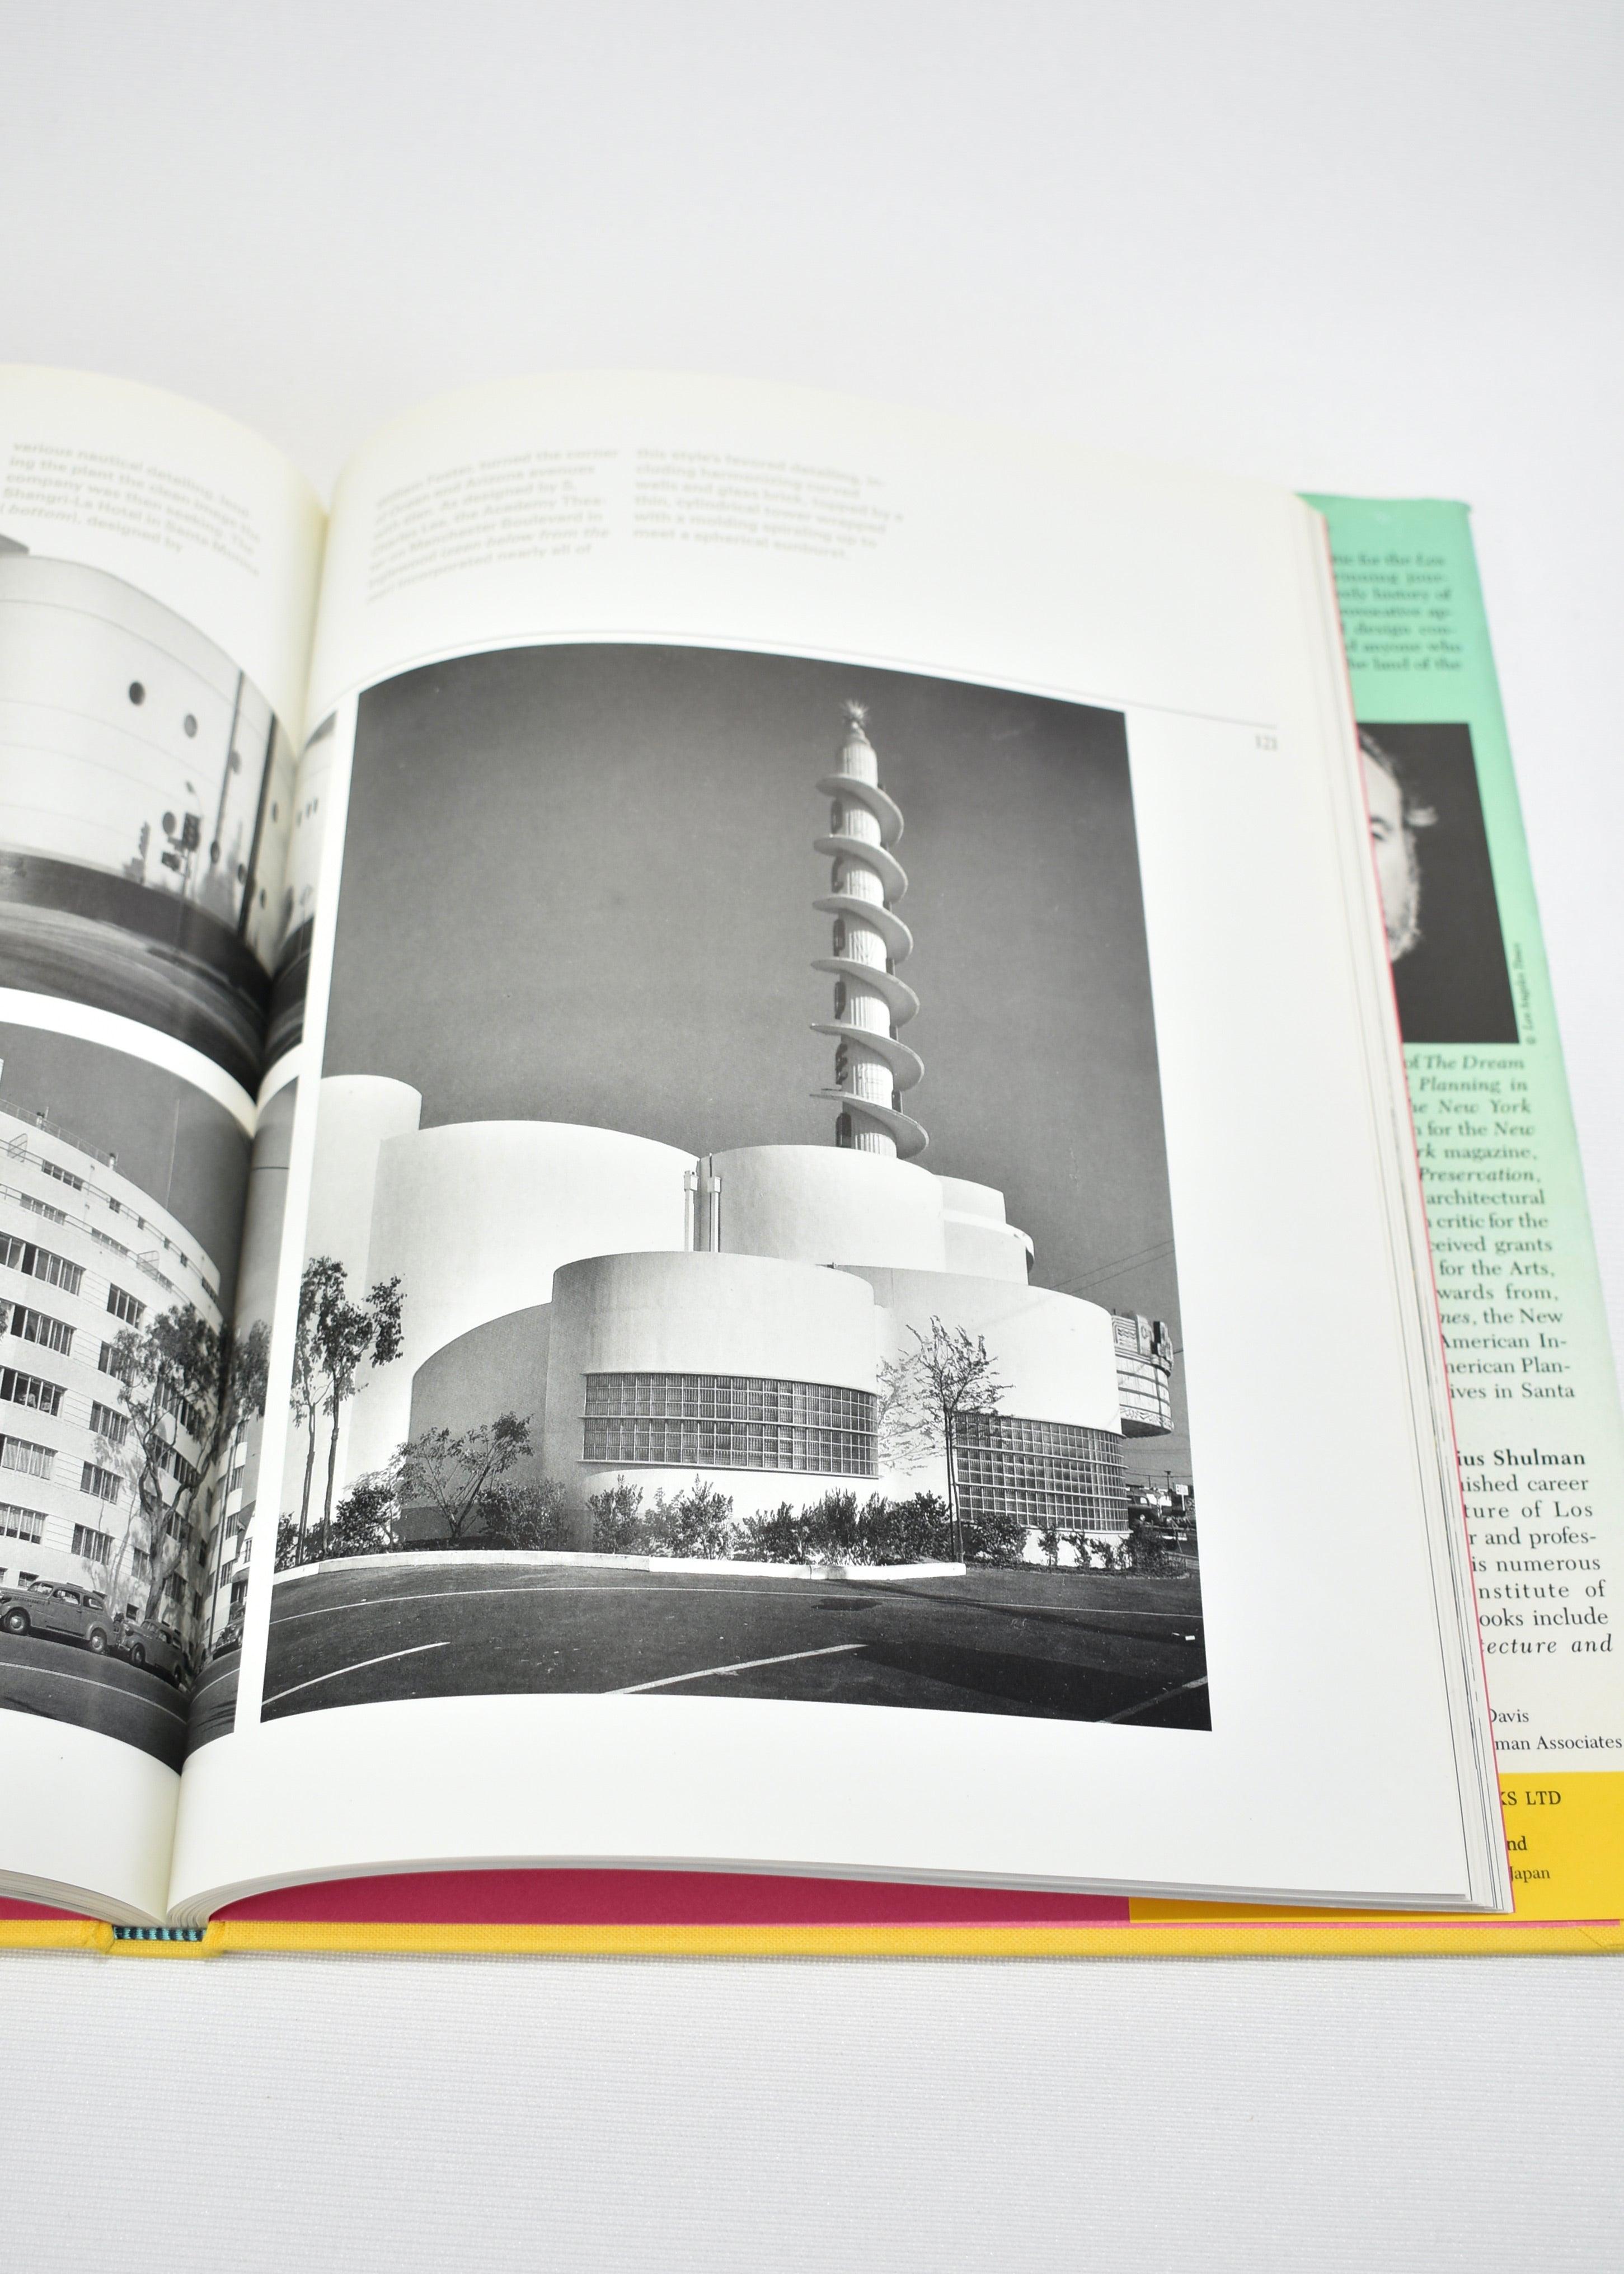 Hardback coffee table book discussing the history of architecture in Los Angeles. By Sam Hall Kaplan, published in 1987. First edition, 224 pages.

